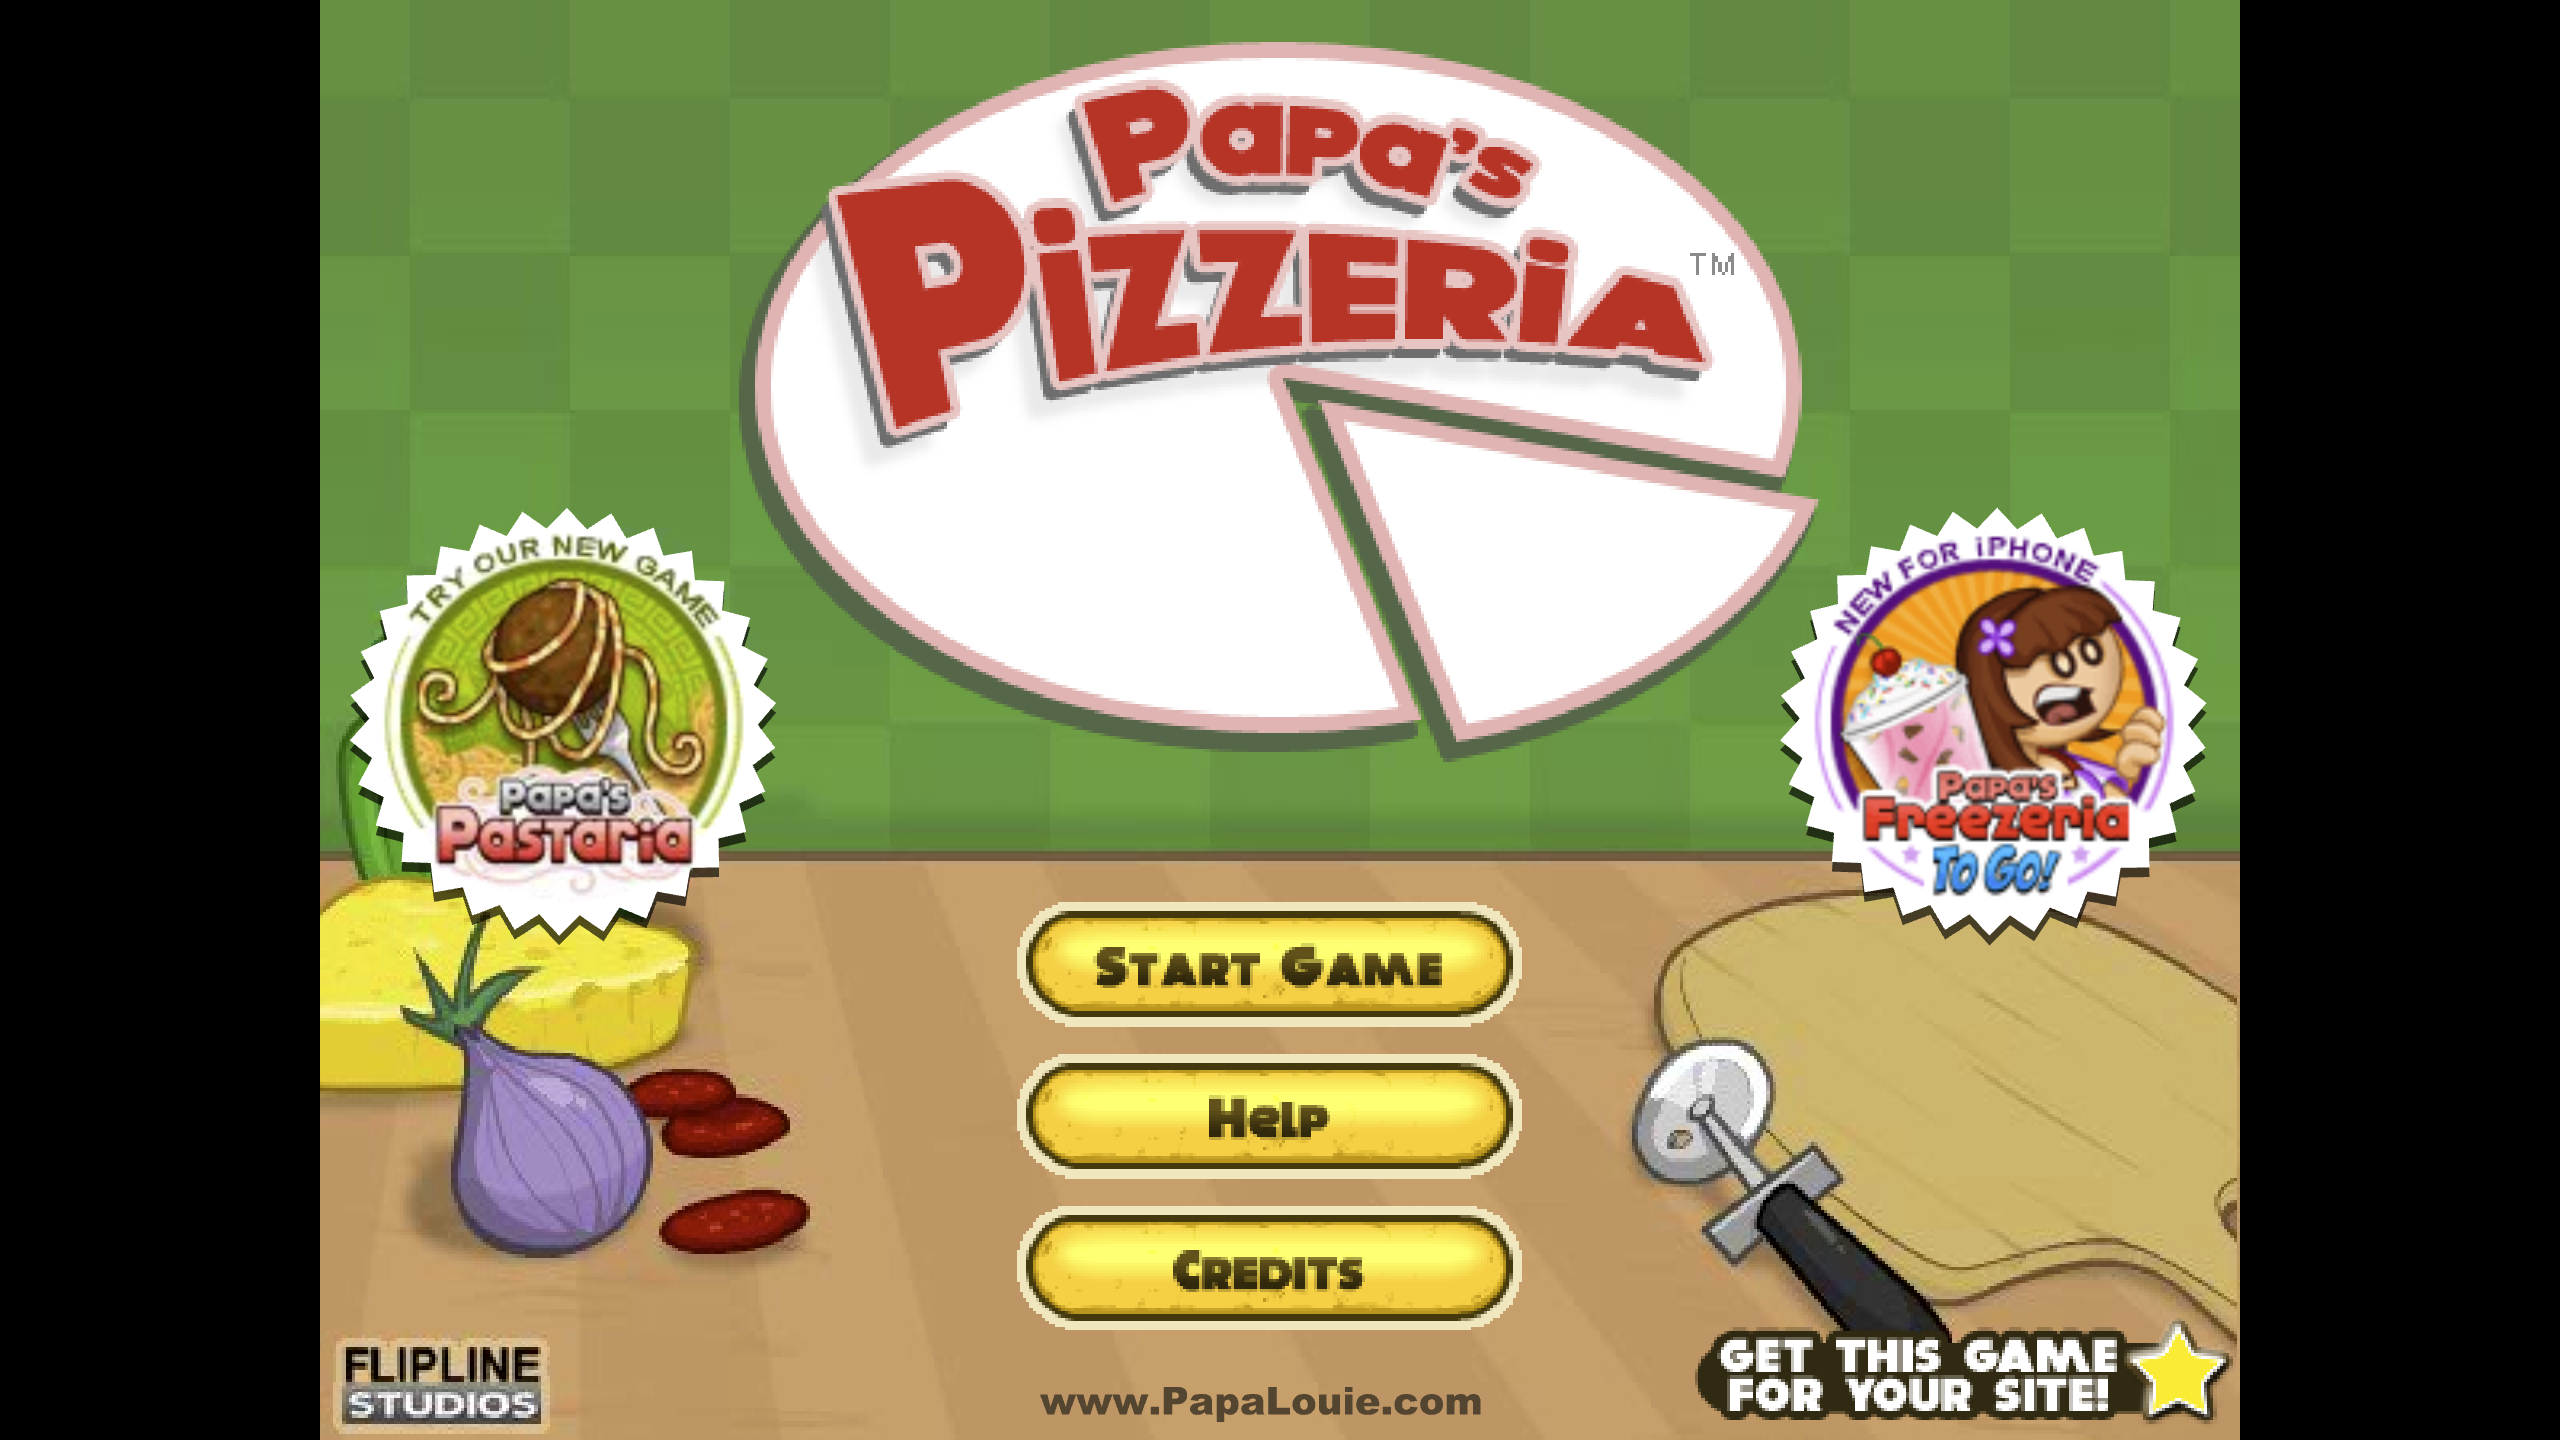 What is the difference between  Papa's Pizzeria HD  and  Papa's